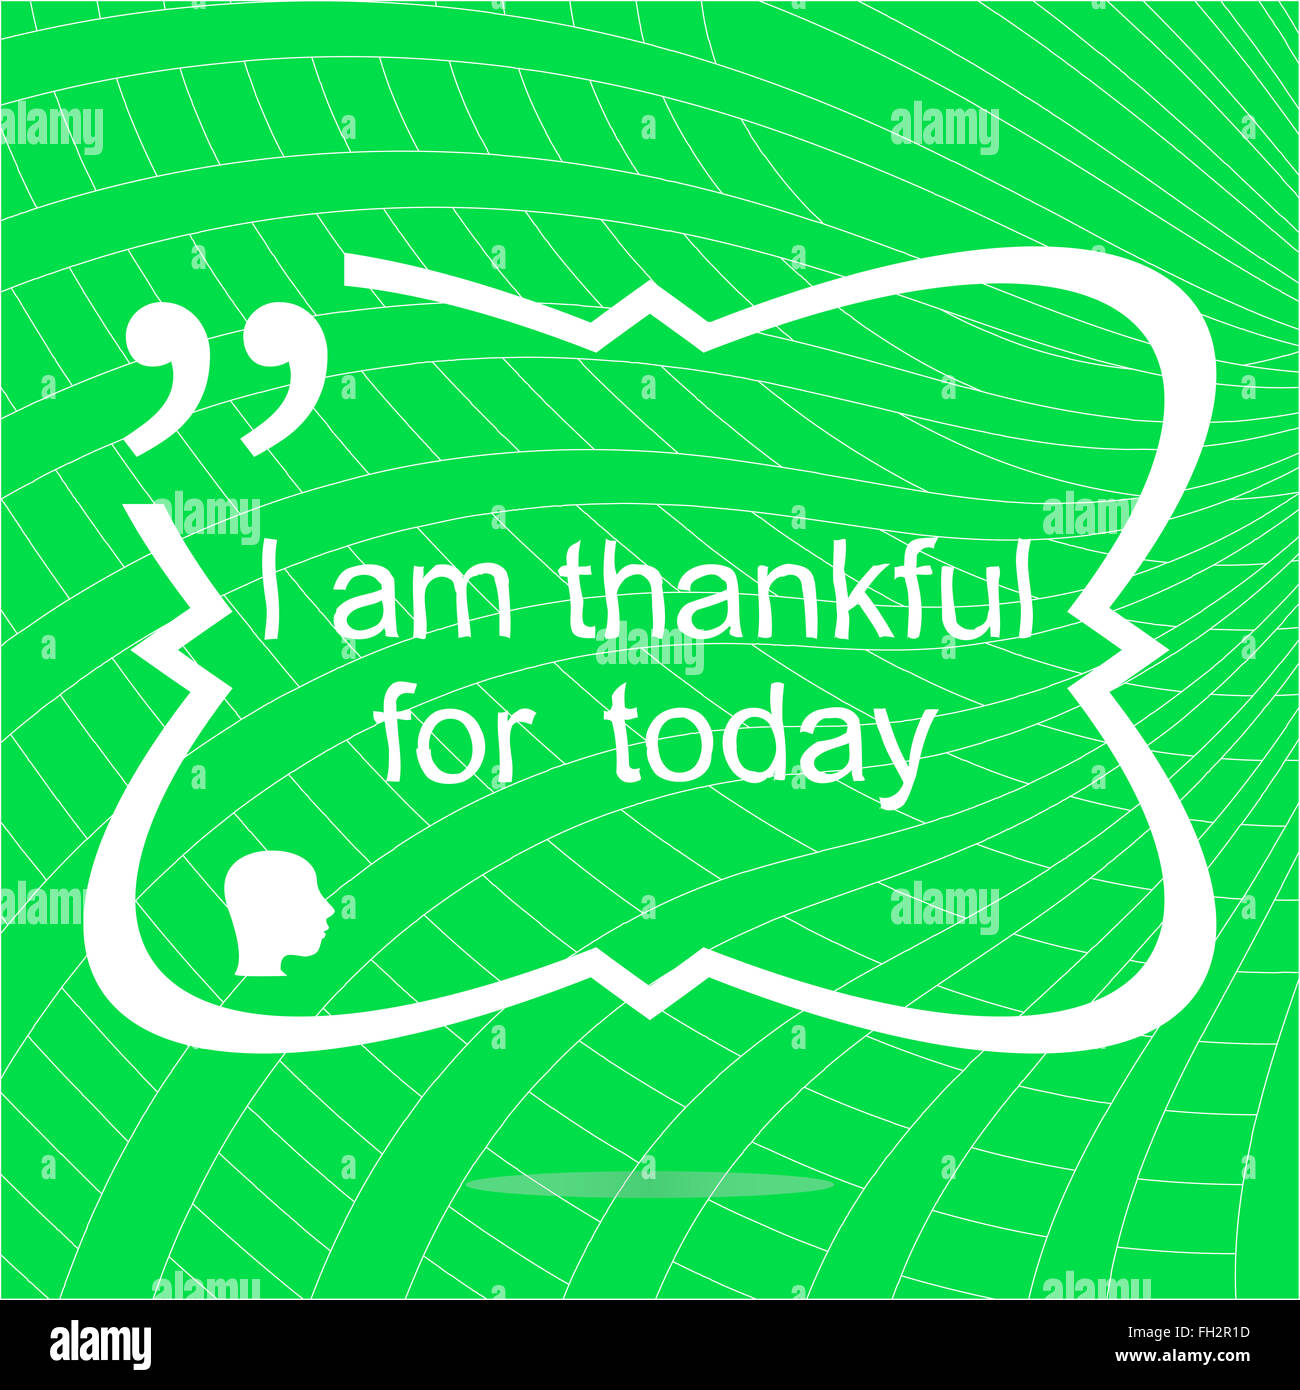 I am thankful for today. Inspirational motivational quote. Simple trendy design. Positive quote Stock Photo